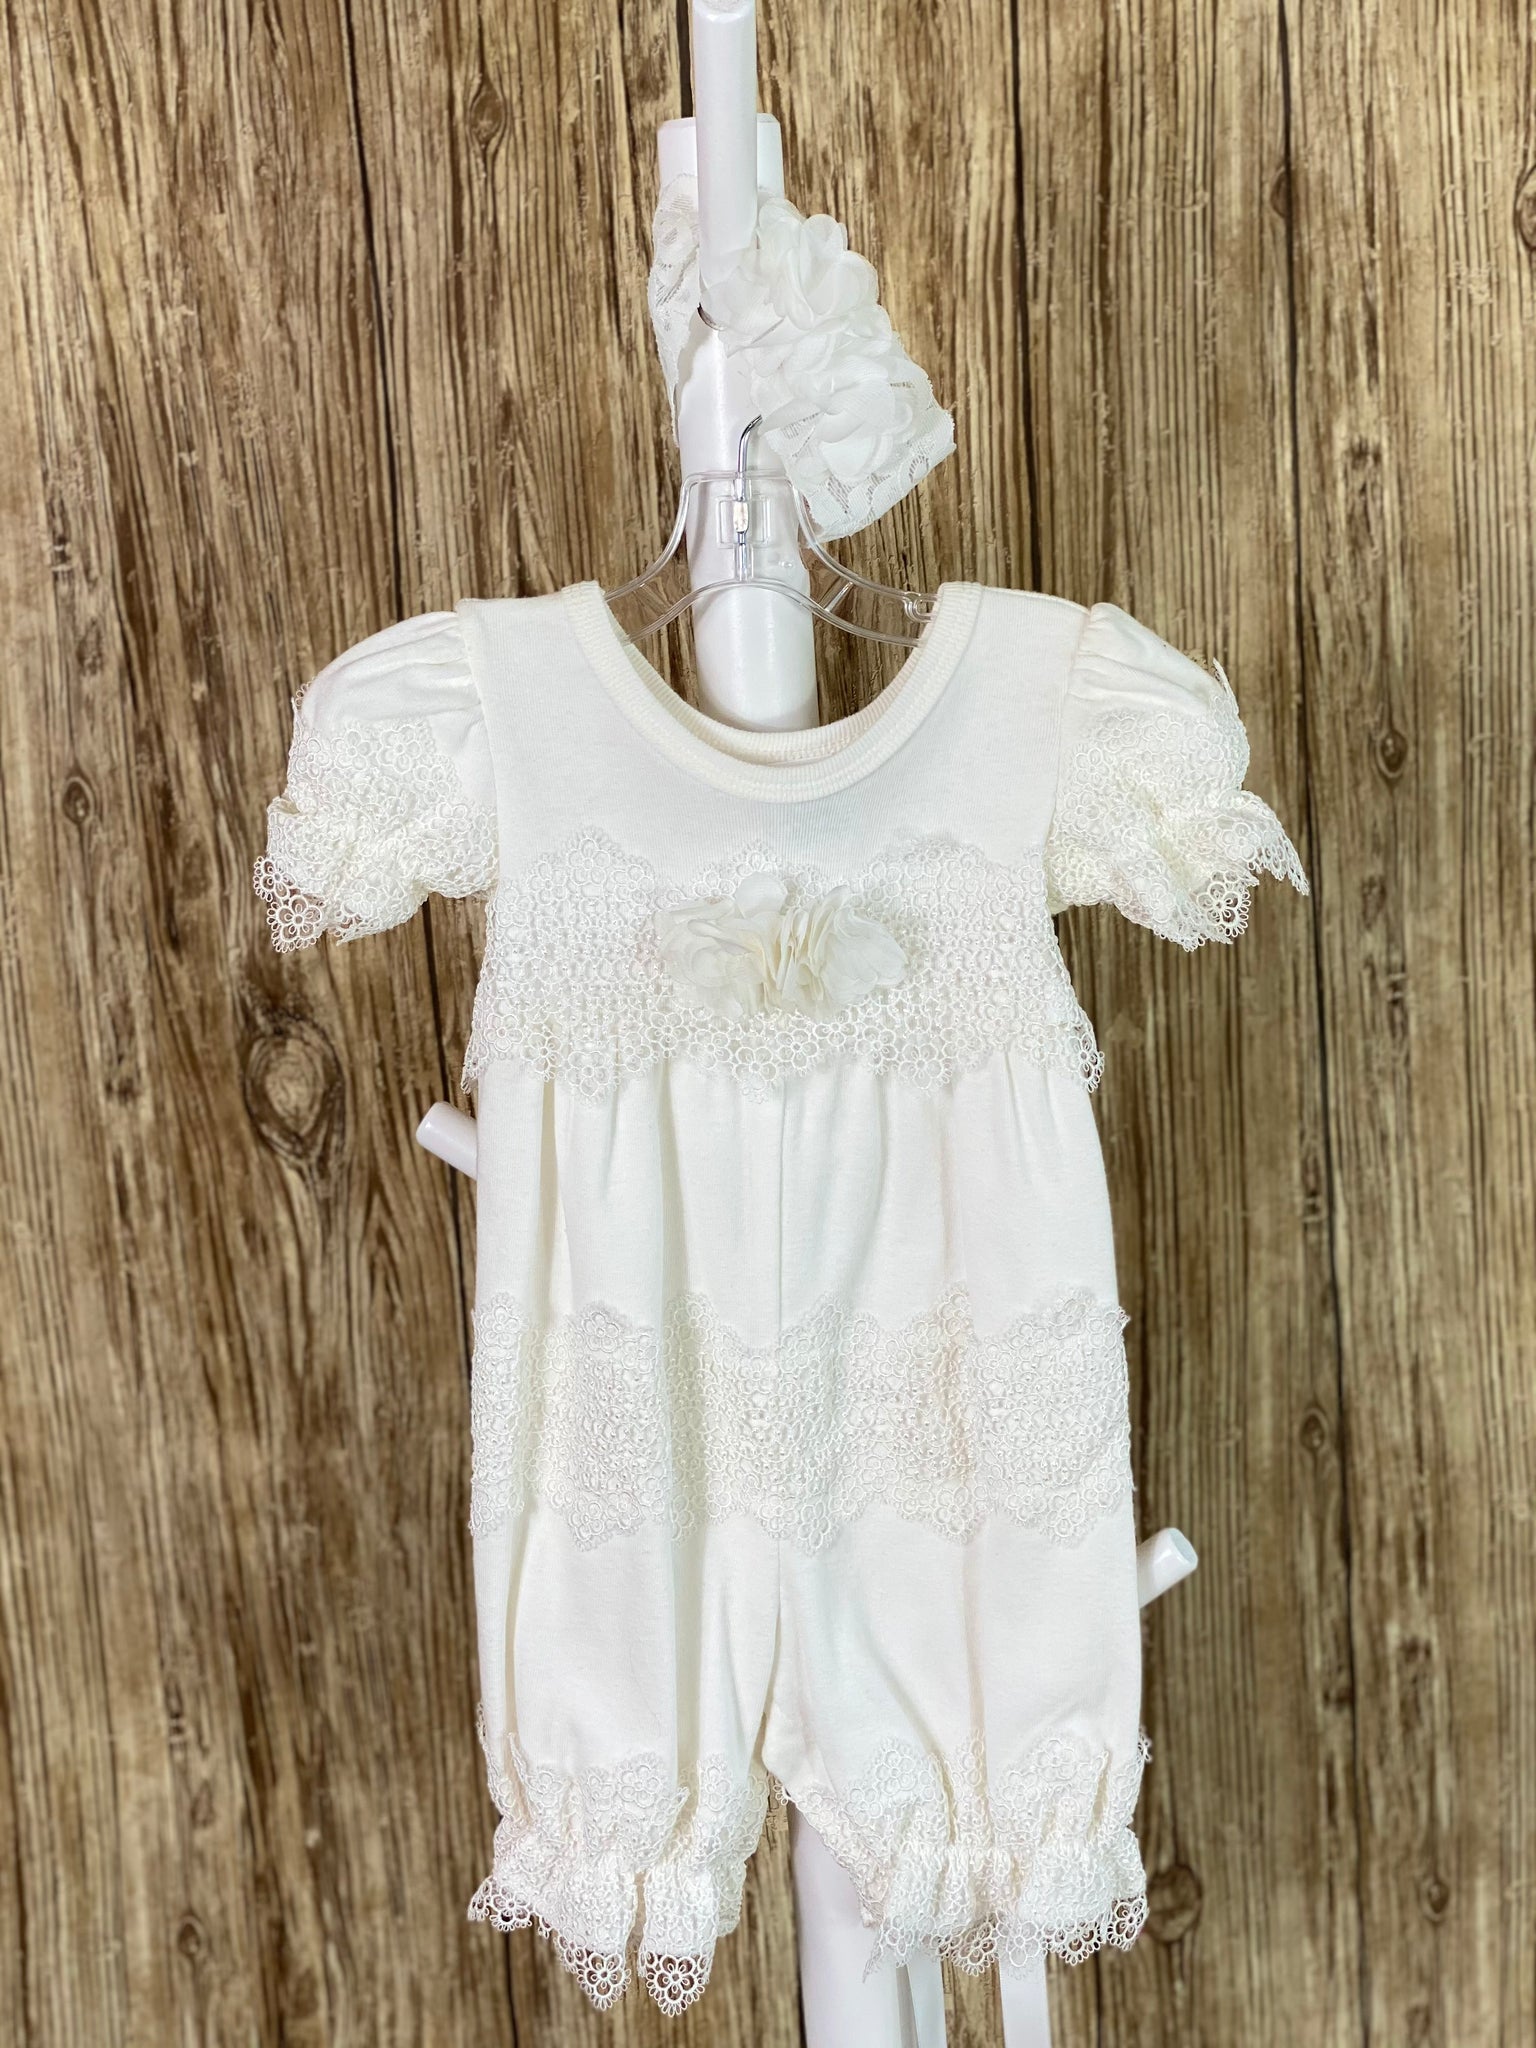 Ivory cotton romper Lace ruffles around bodice  Lace ruffles around legs Lace ruffles around arms Flowers on bodice lace ruffle Lace headband with flowers